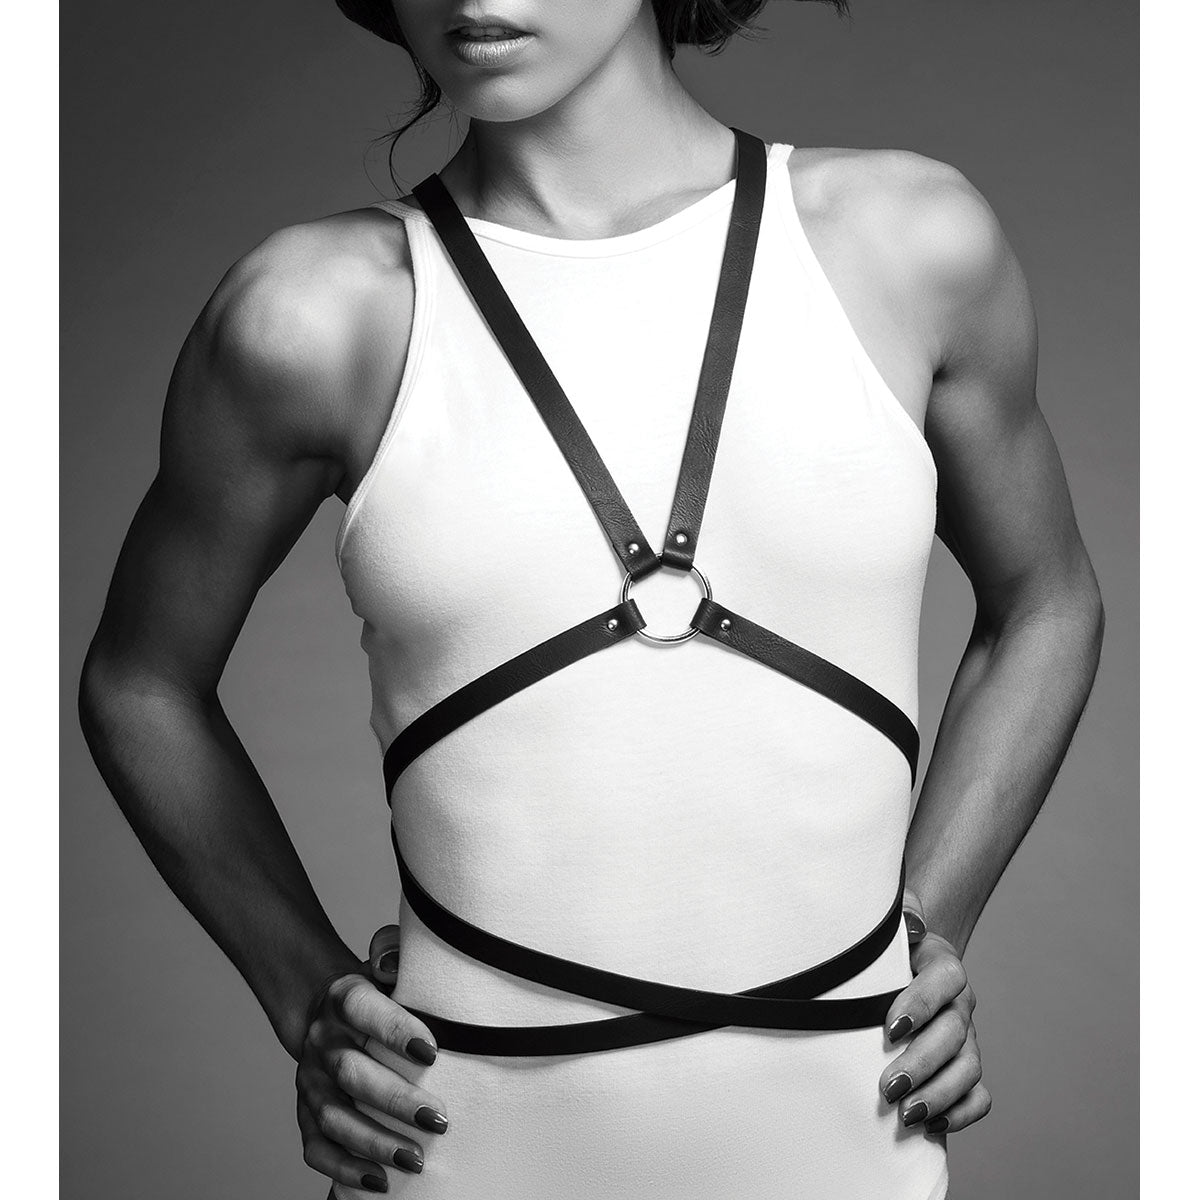 Bijoux Indiscrets Maze Multi-Way Body Harness - Buy At Luxury Toy X - Free 3-Day Shipping